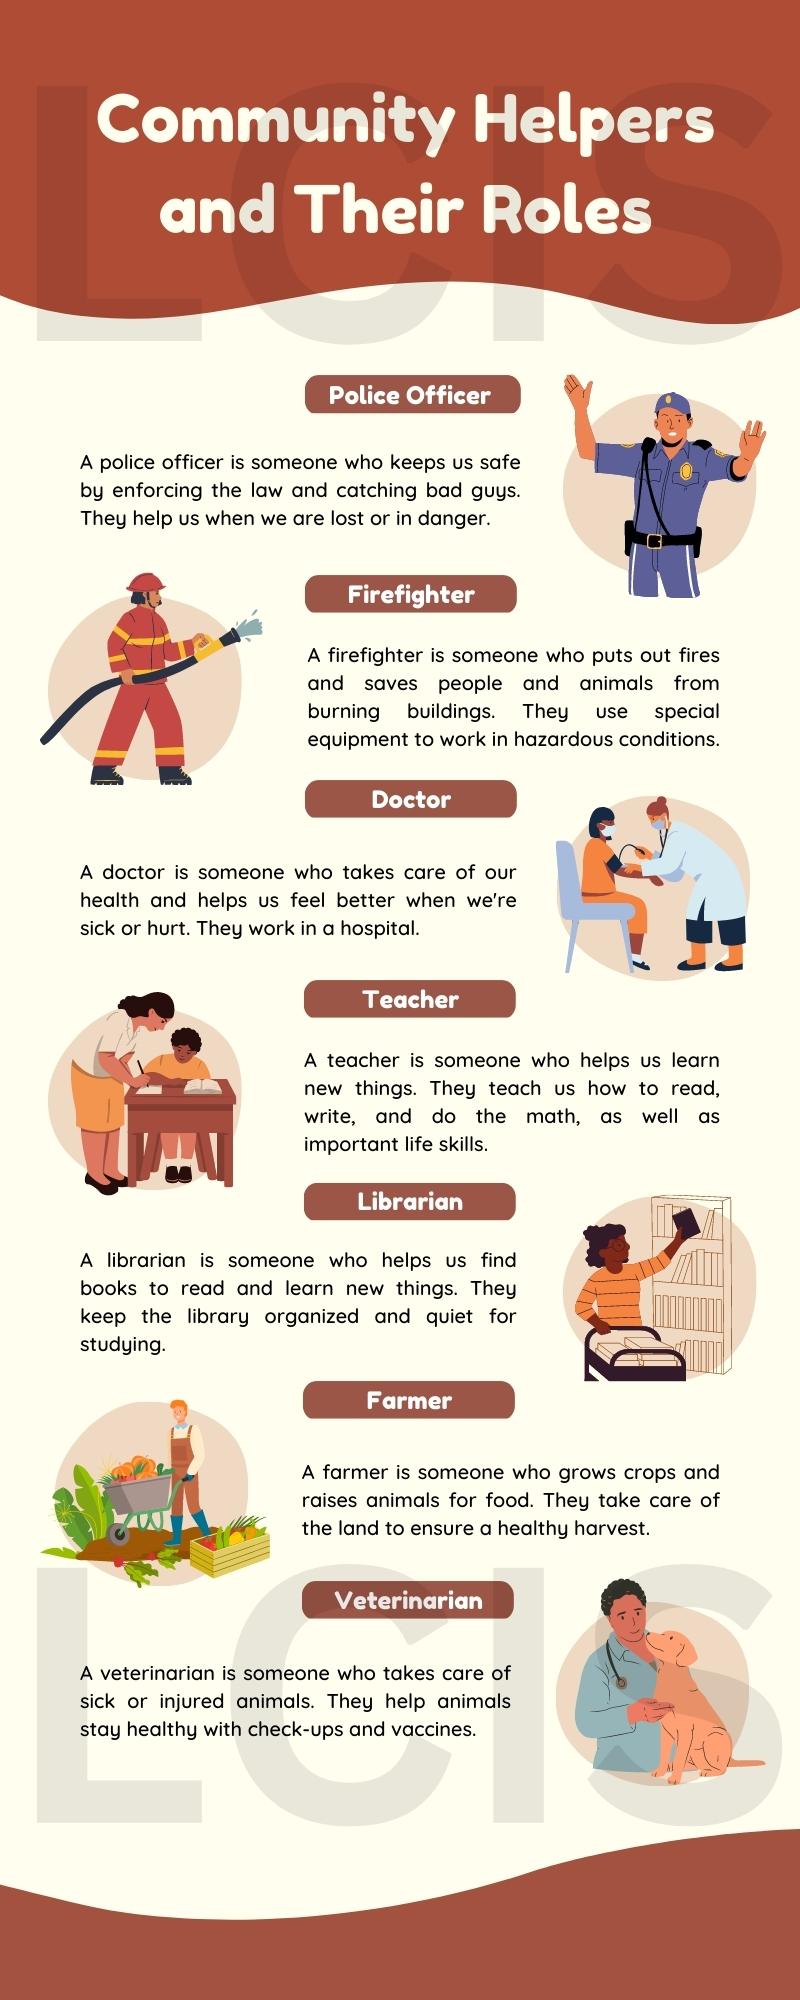 Community helpers and their roles